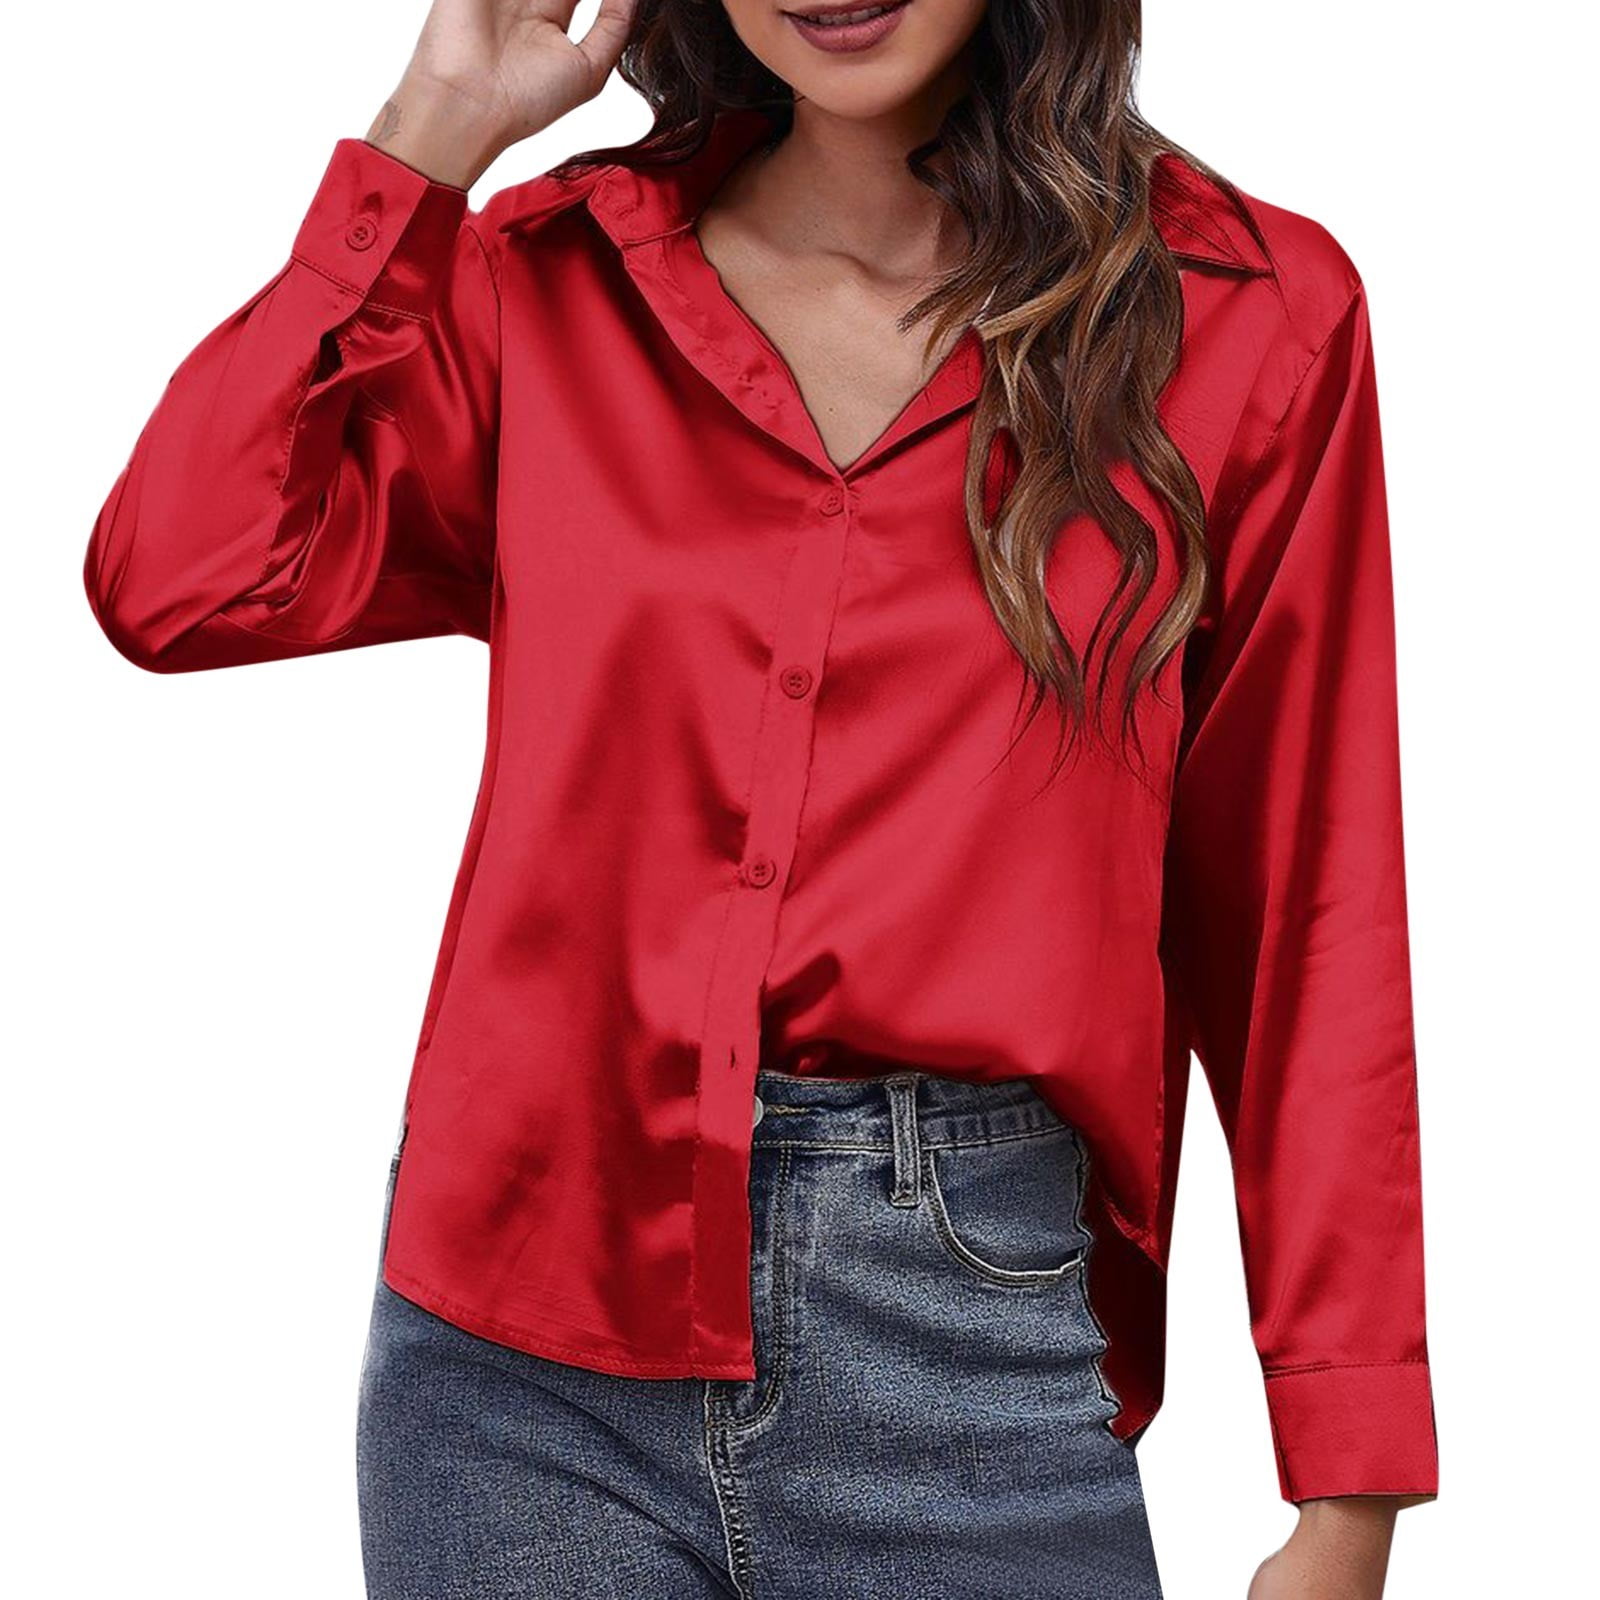 xiuh solid color lapel neck satin shirt women's satin long sleeved shirt  casual loose blouse leisure flowy shirts 